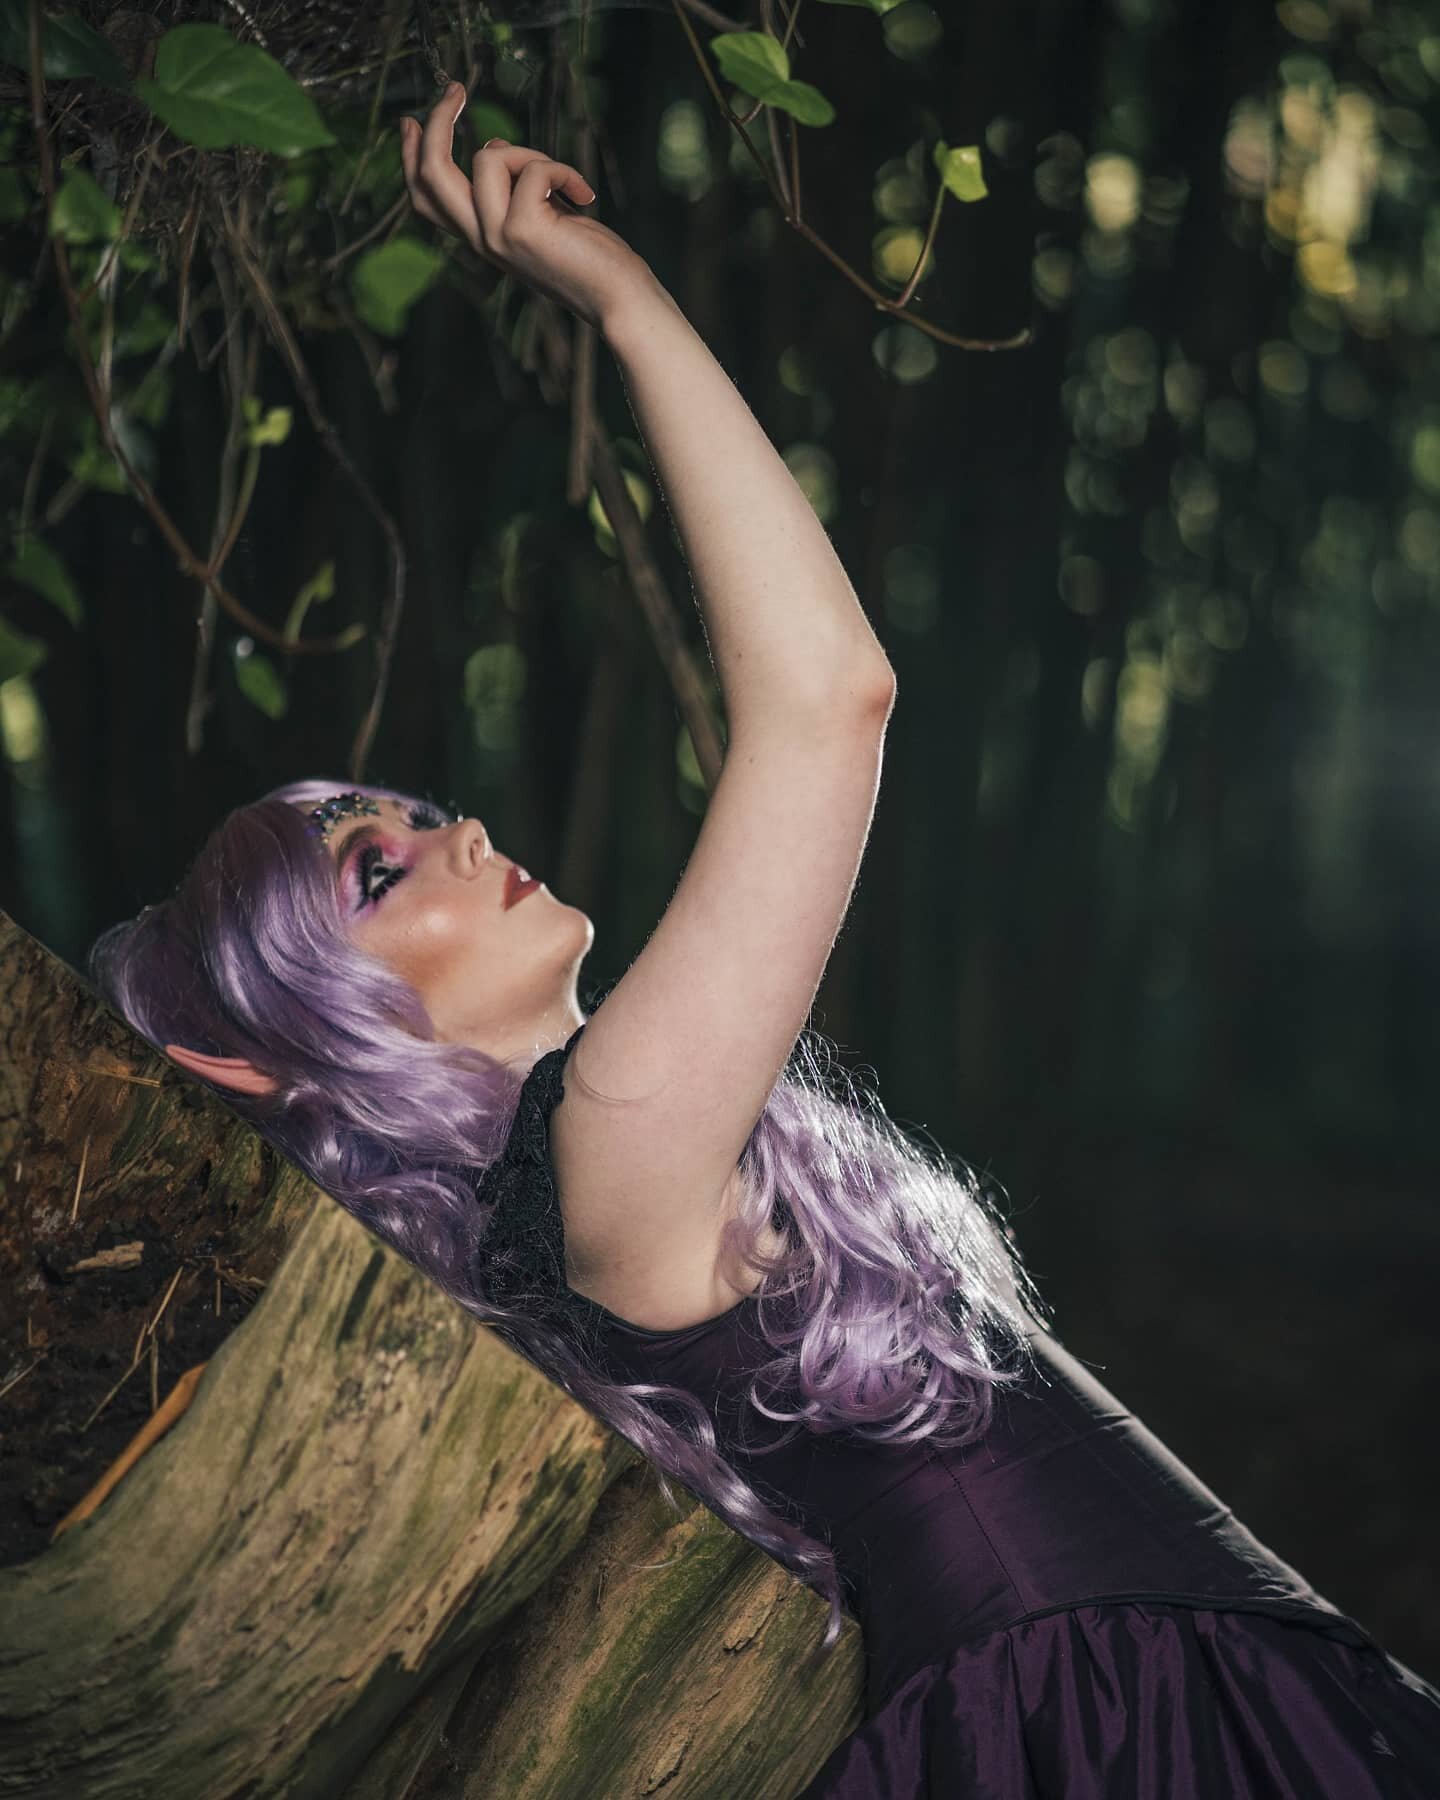 Happy Beltaine!
.
Waiting for the end of quarantine like.
.
📷 by @buhayphotography.
Makeup by @makeupbyanaesbeydi.
Shot at the SF Botanical Garden.
.
.
.
#quarantinelife #quarantinemood #specialeffectsmakeup #fantasyart #elf  #fantasymakeup #cosplay